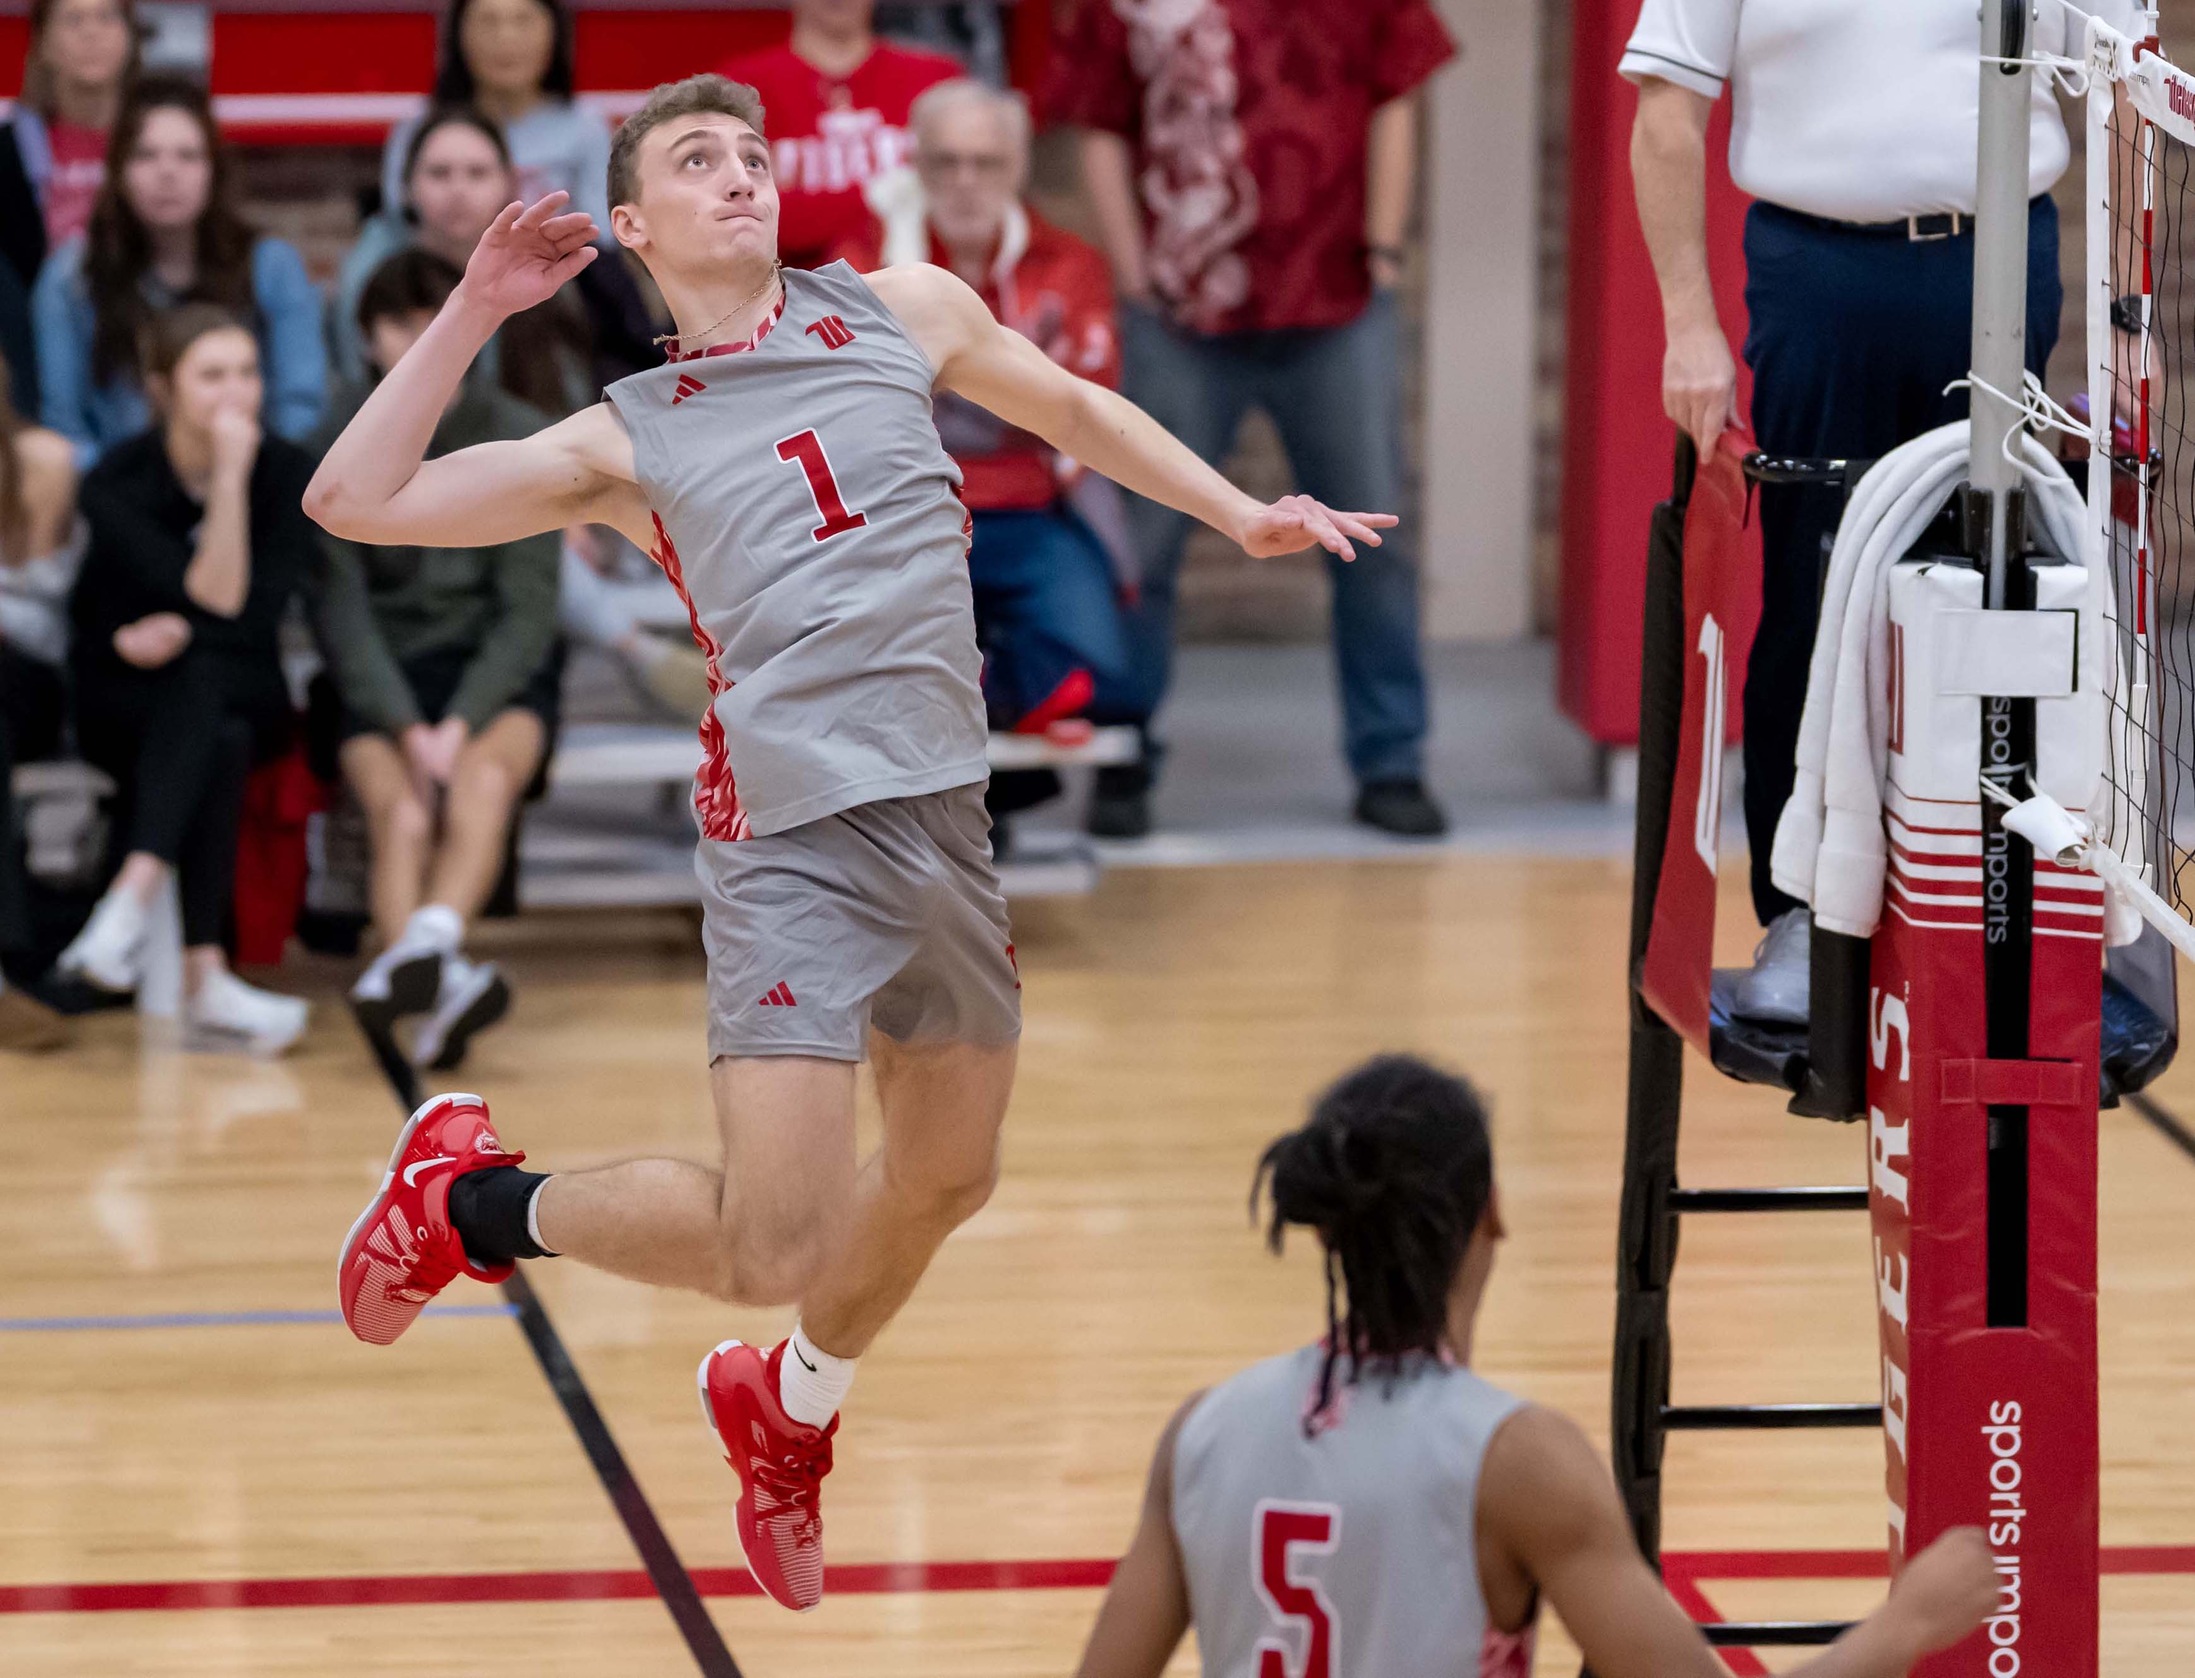 Men's Volleyball falls 3-0 in tough battle with No. 8 Loras